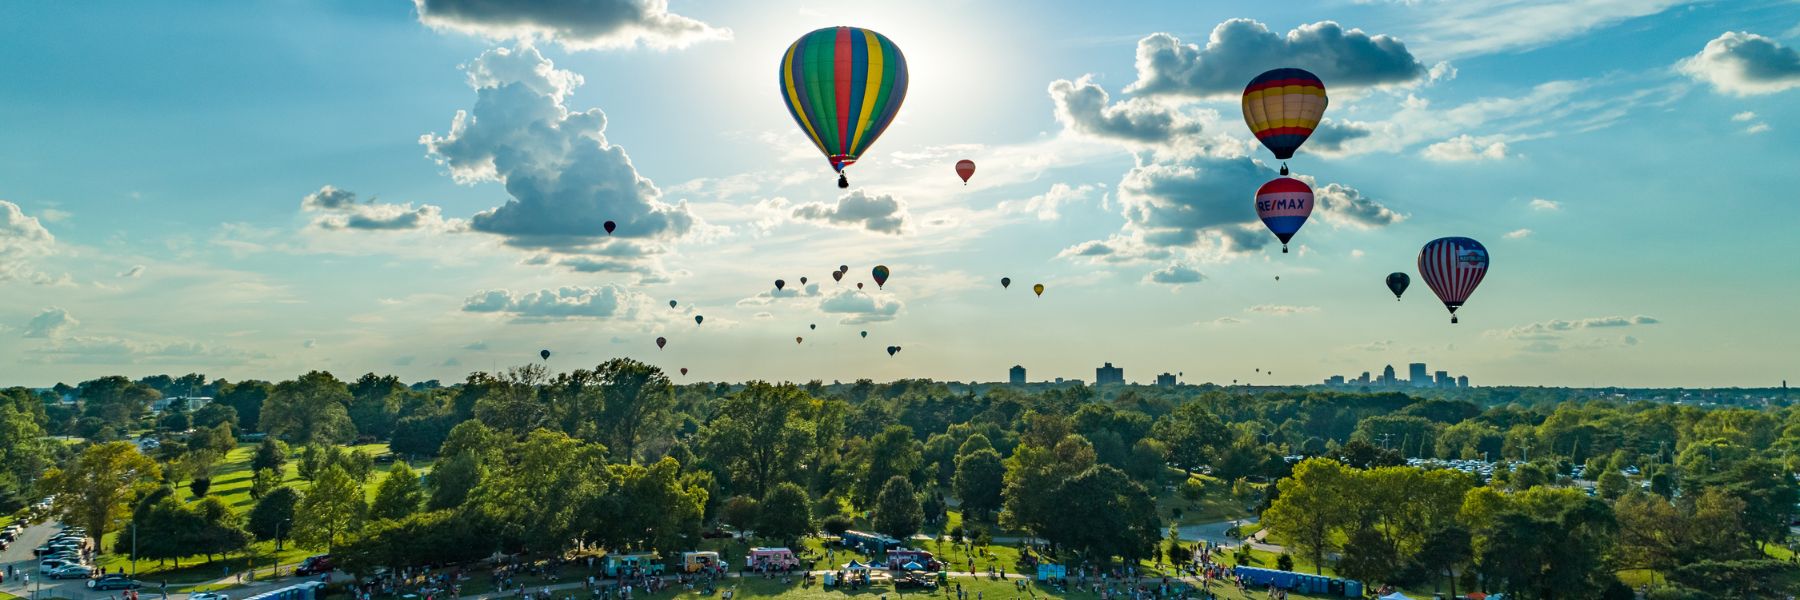 The Great Forest Park Balloon Race is one of St. Louis' signature events.